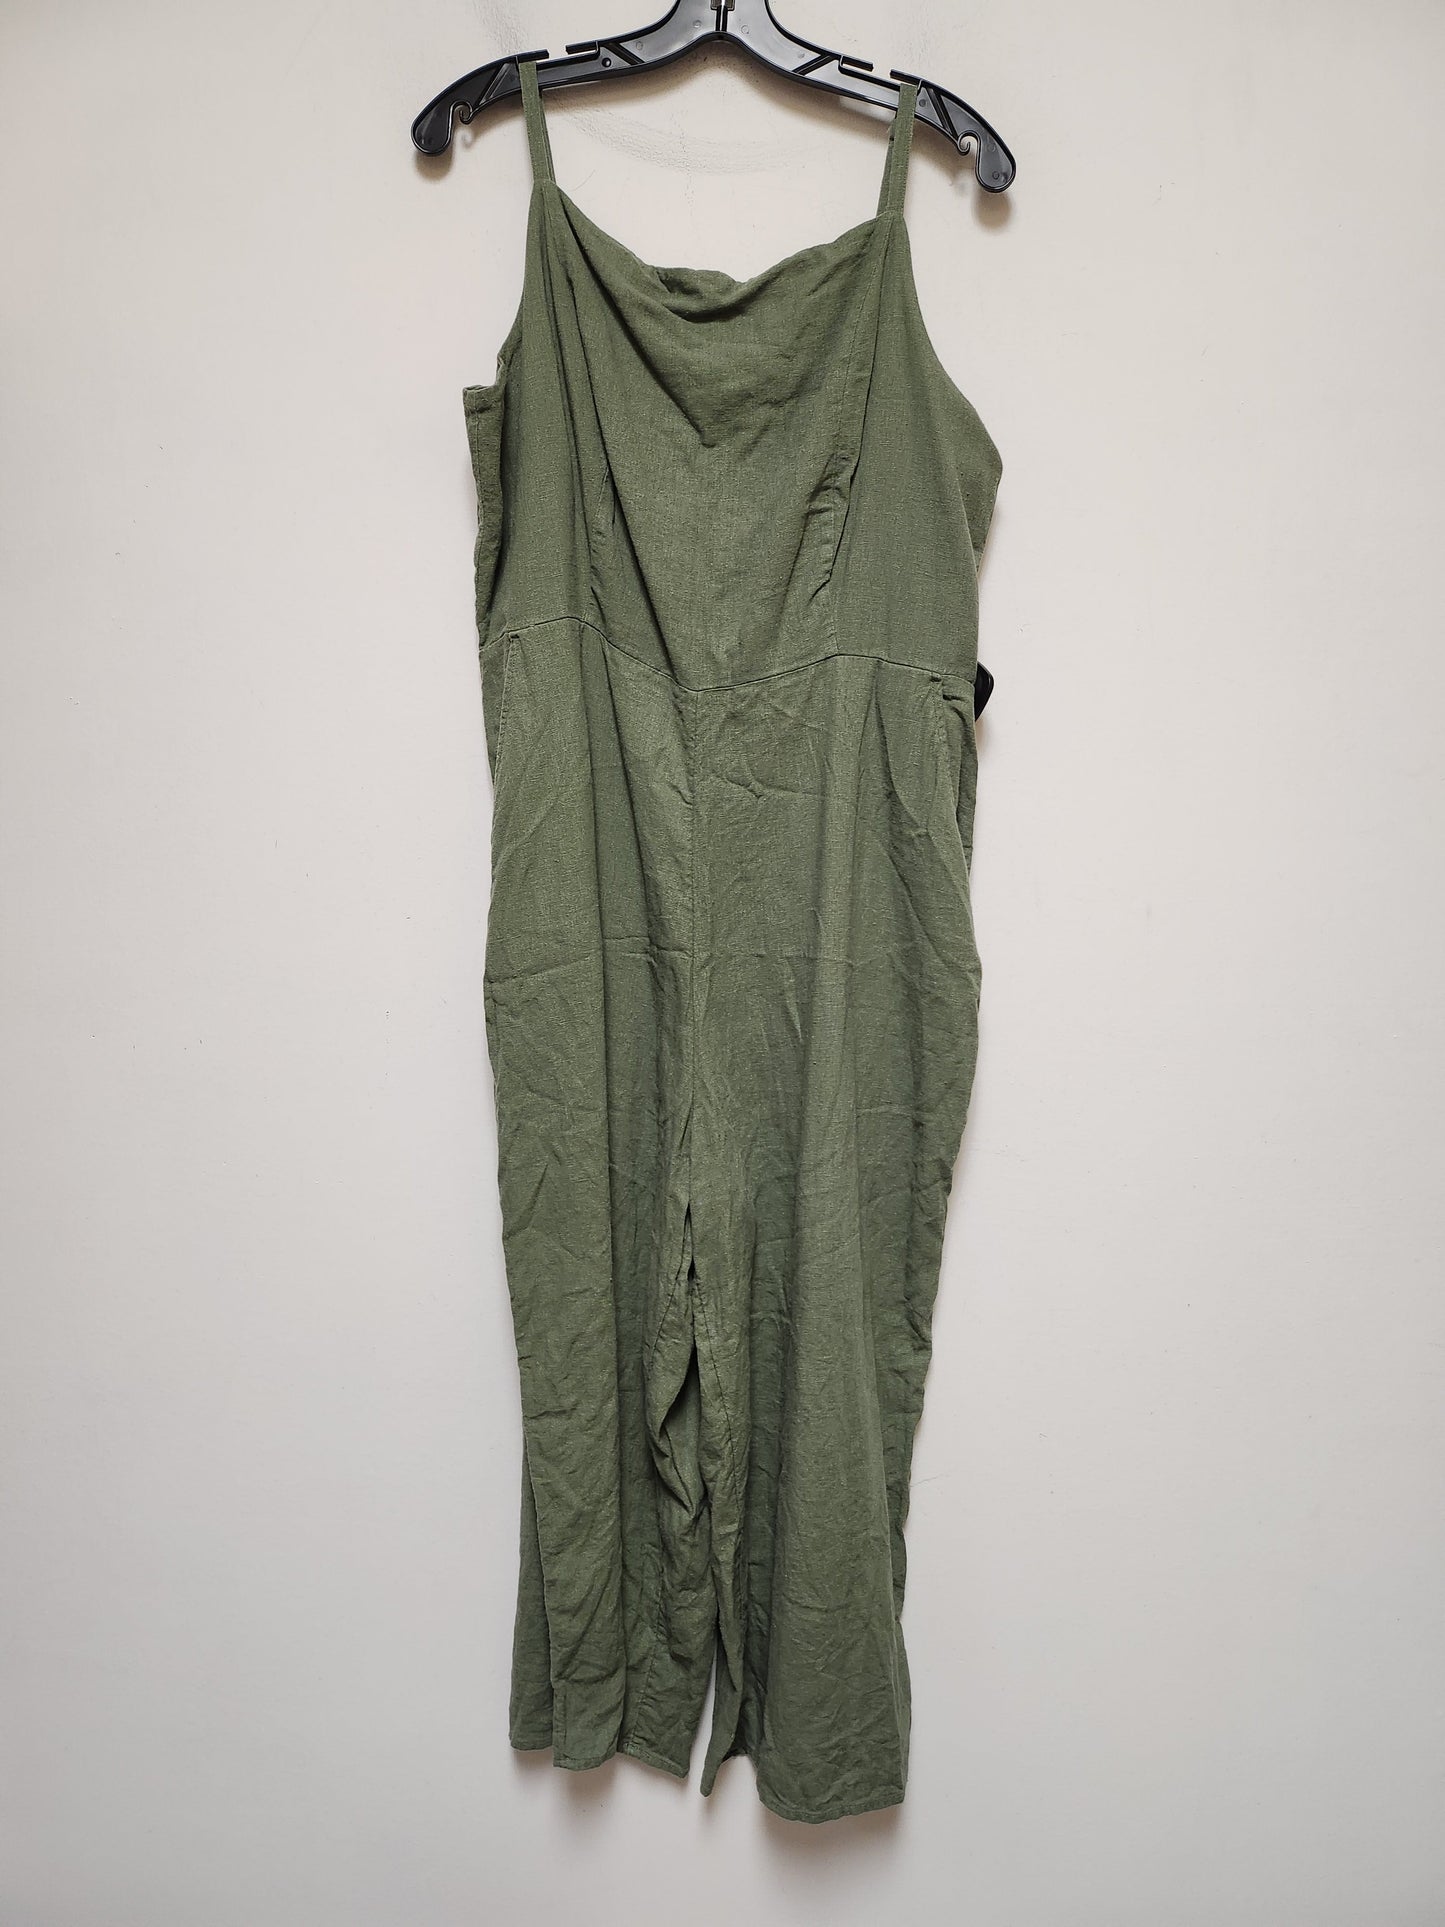 Green Jumpsuit Old Navy, Size Xl